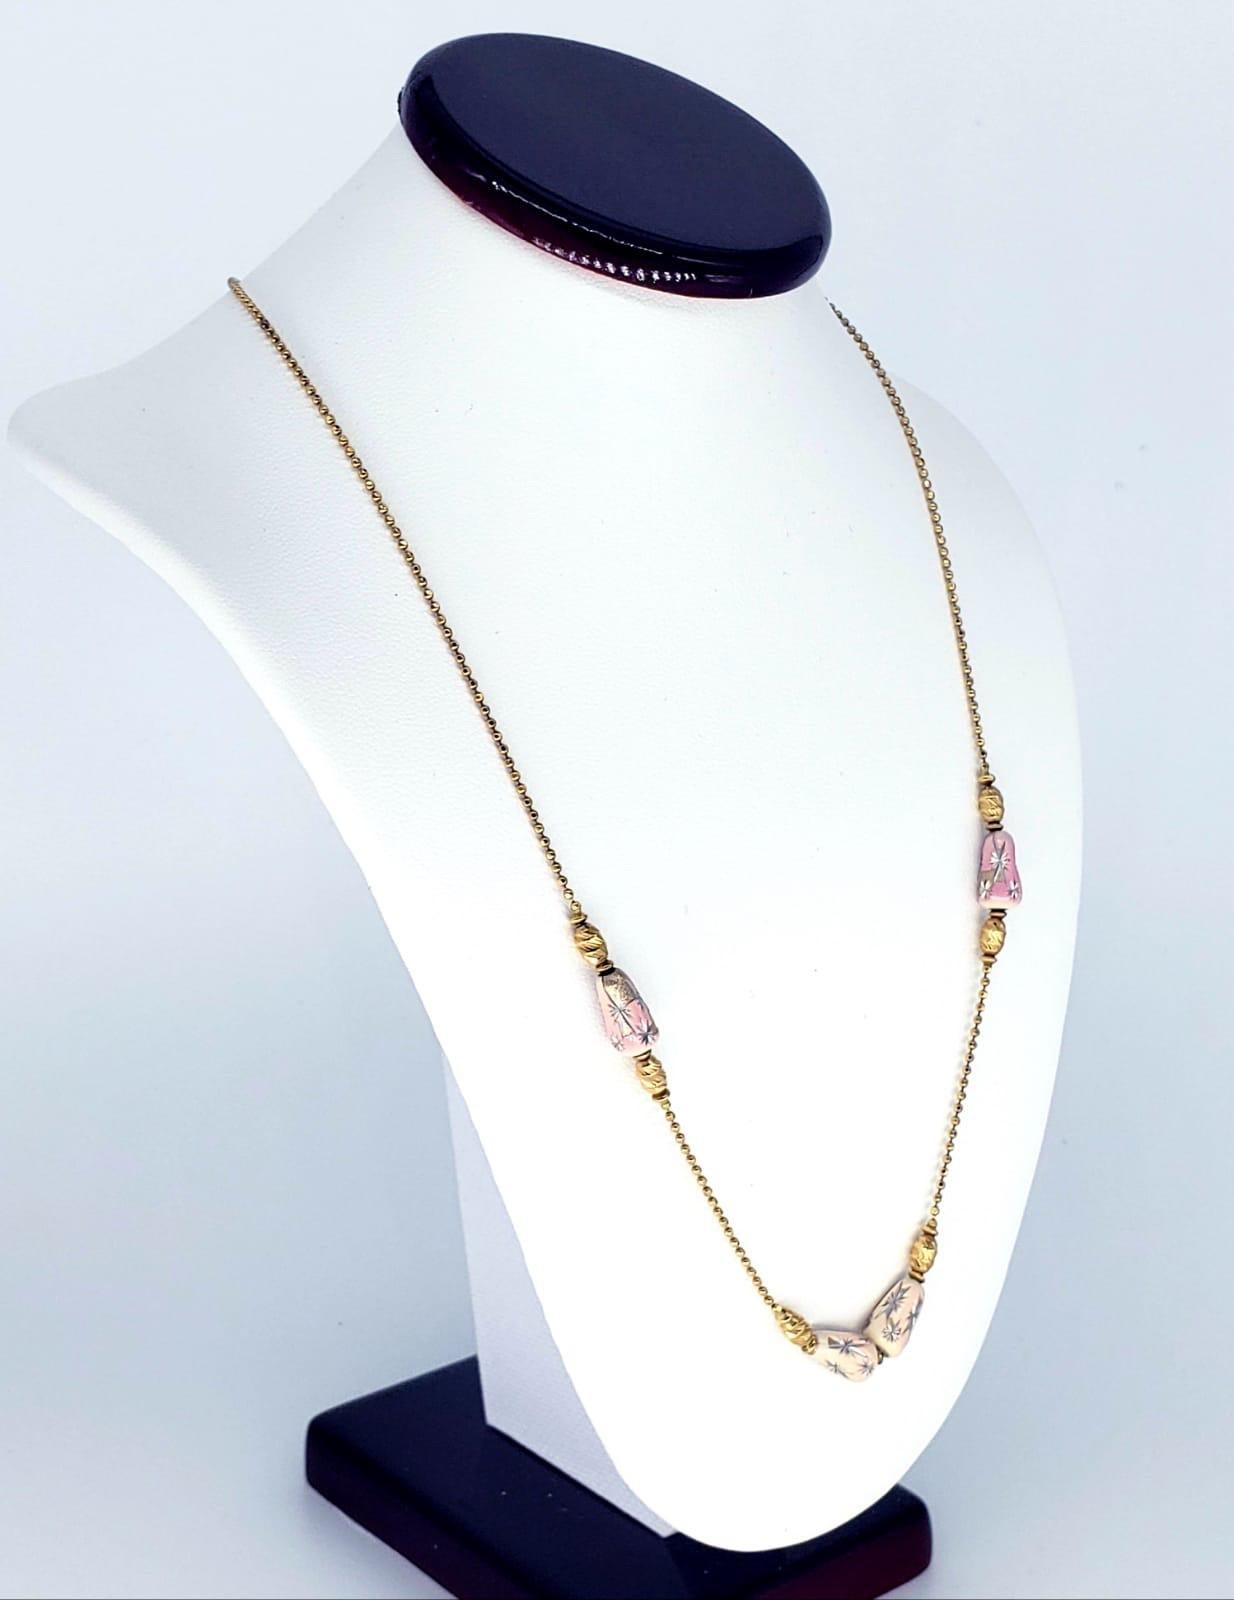 Vintage Enamel Stardust Bead Necklace 18 Karat Gold In Good Condition For Sale In Miami, FL